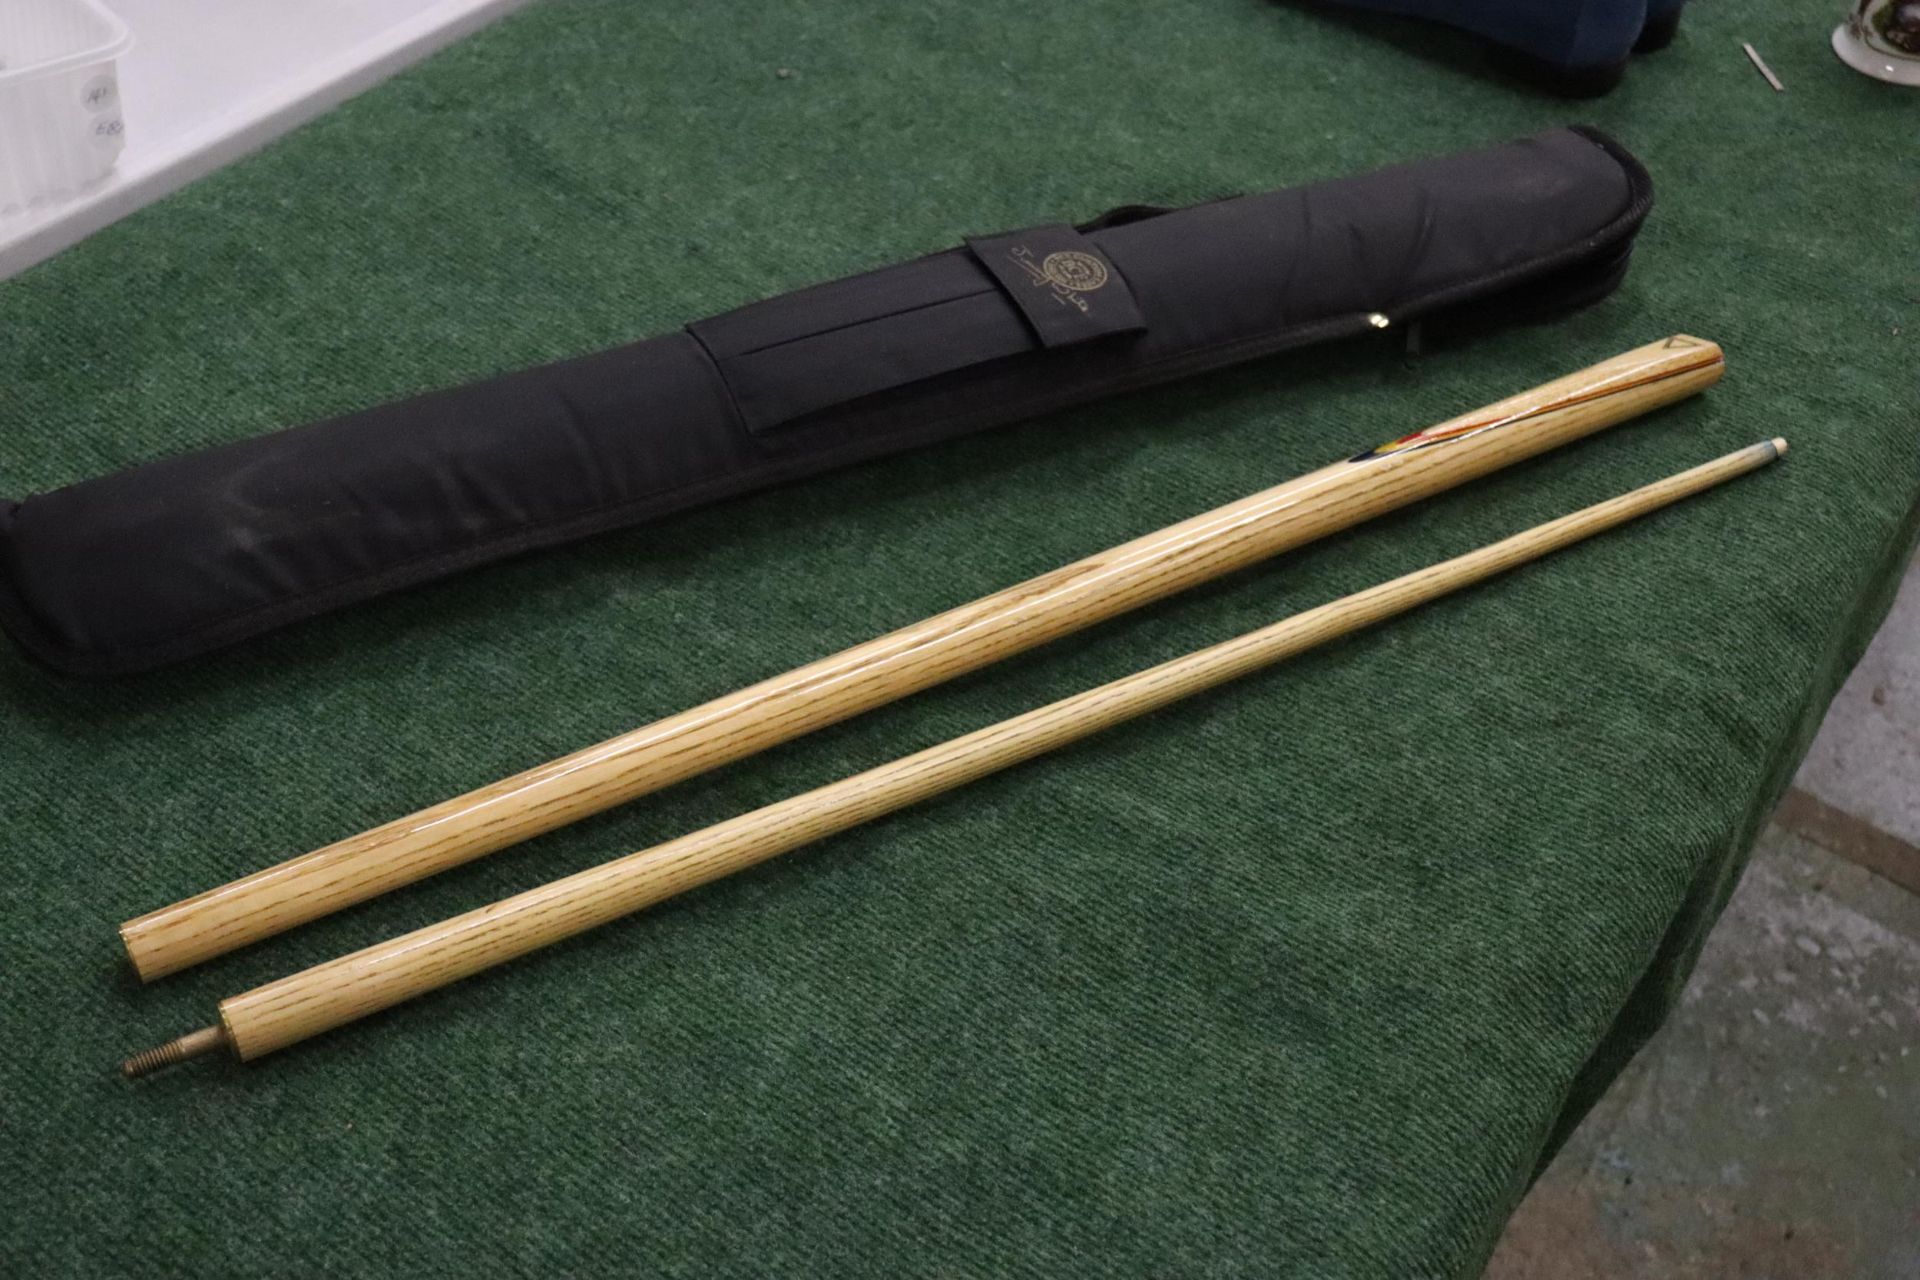 A SNOOKER/POOL CUE IN A JIMMY WHITE SOFT CASE - Image 5 of 8